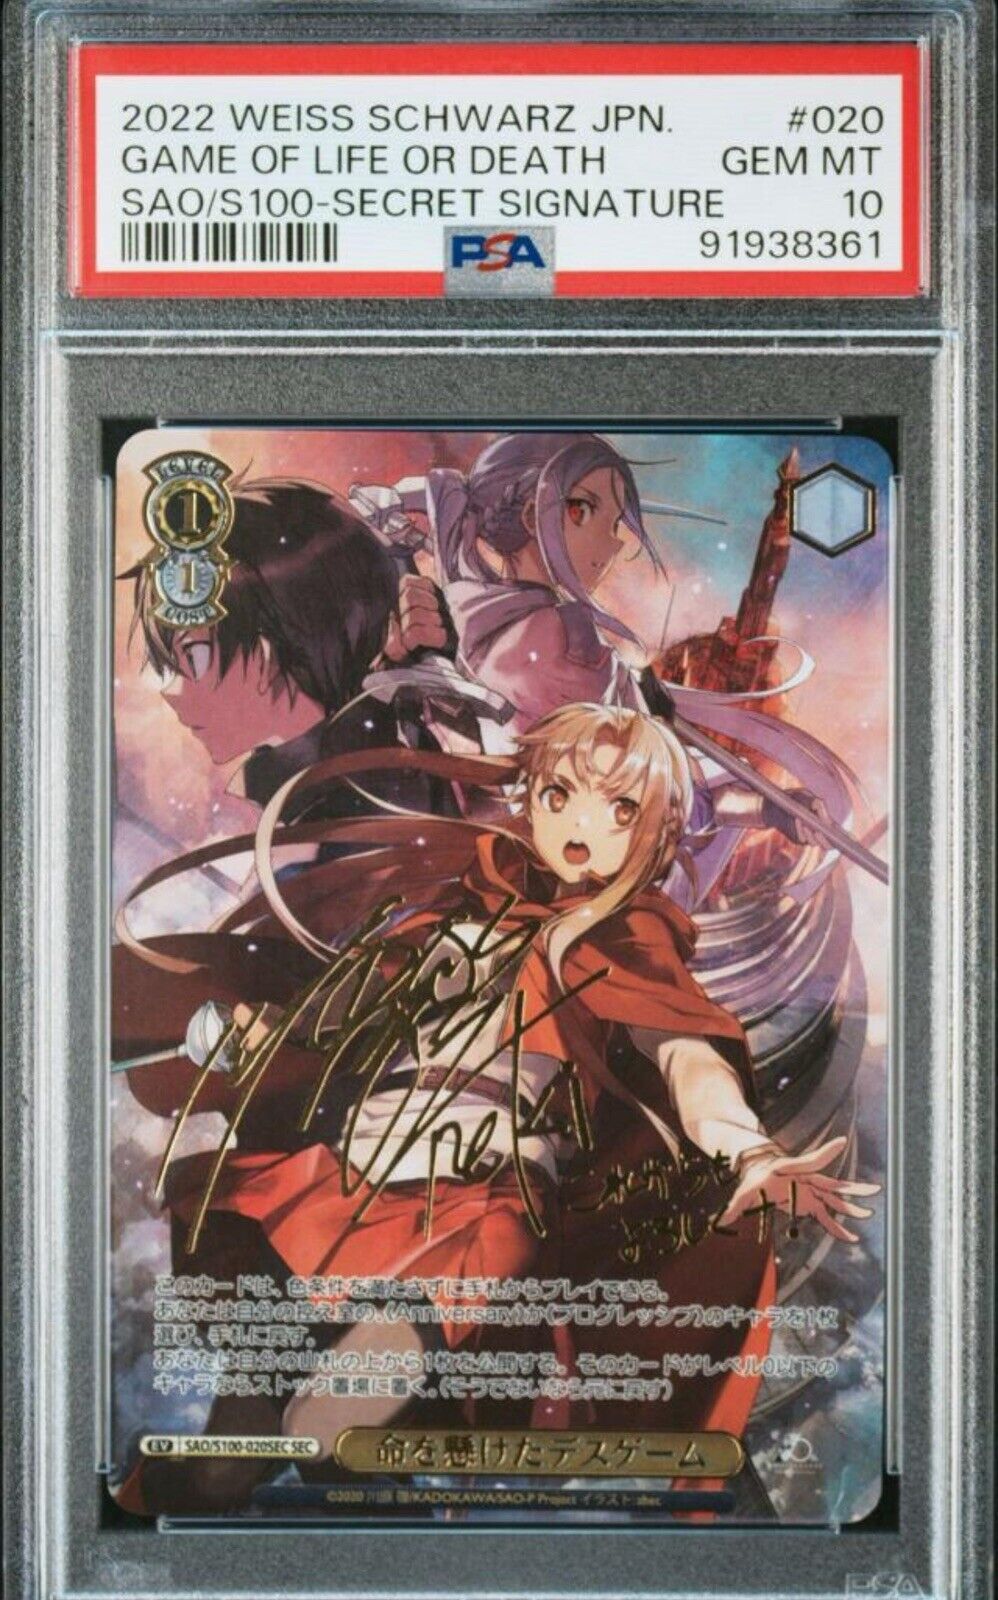 2023 Weiss Schwarz 10th Anniversary Game Of Life Or Death PSA10